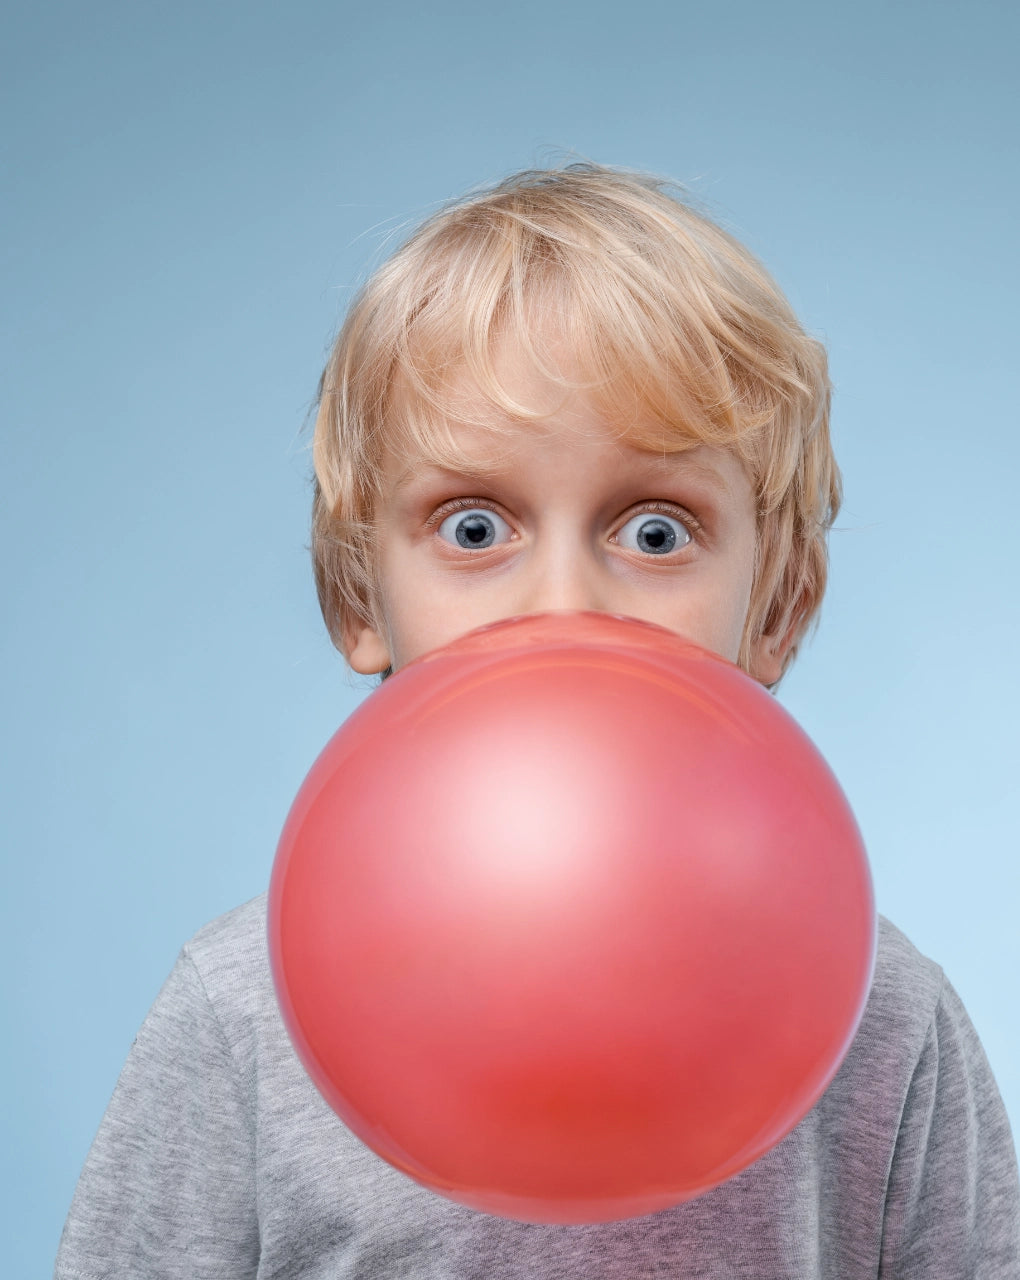 Child with large chewing gum bubble